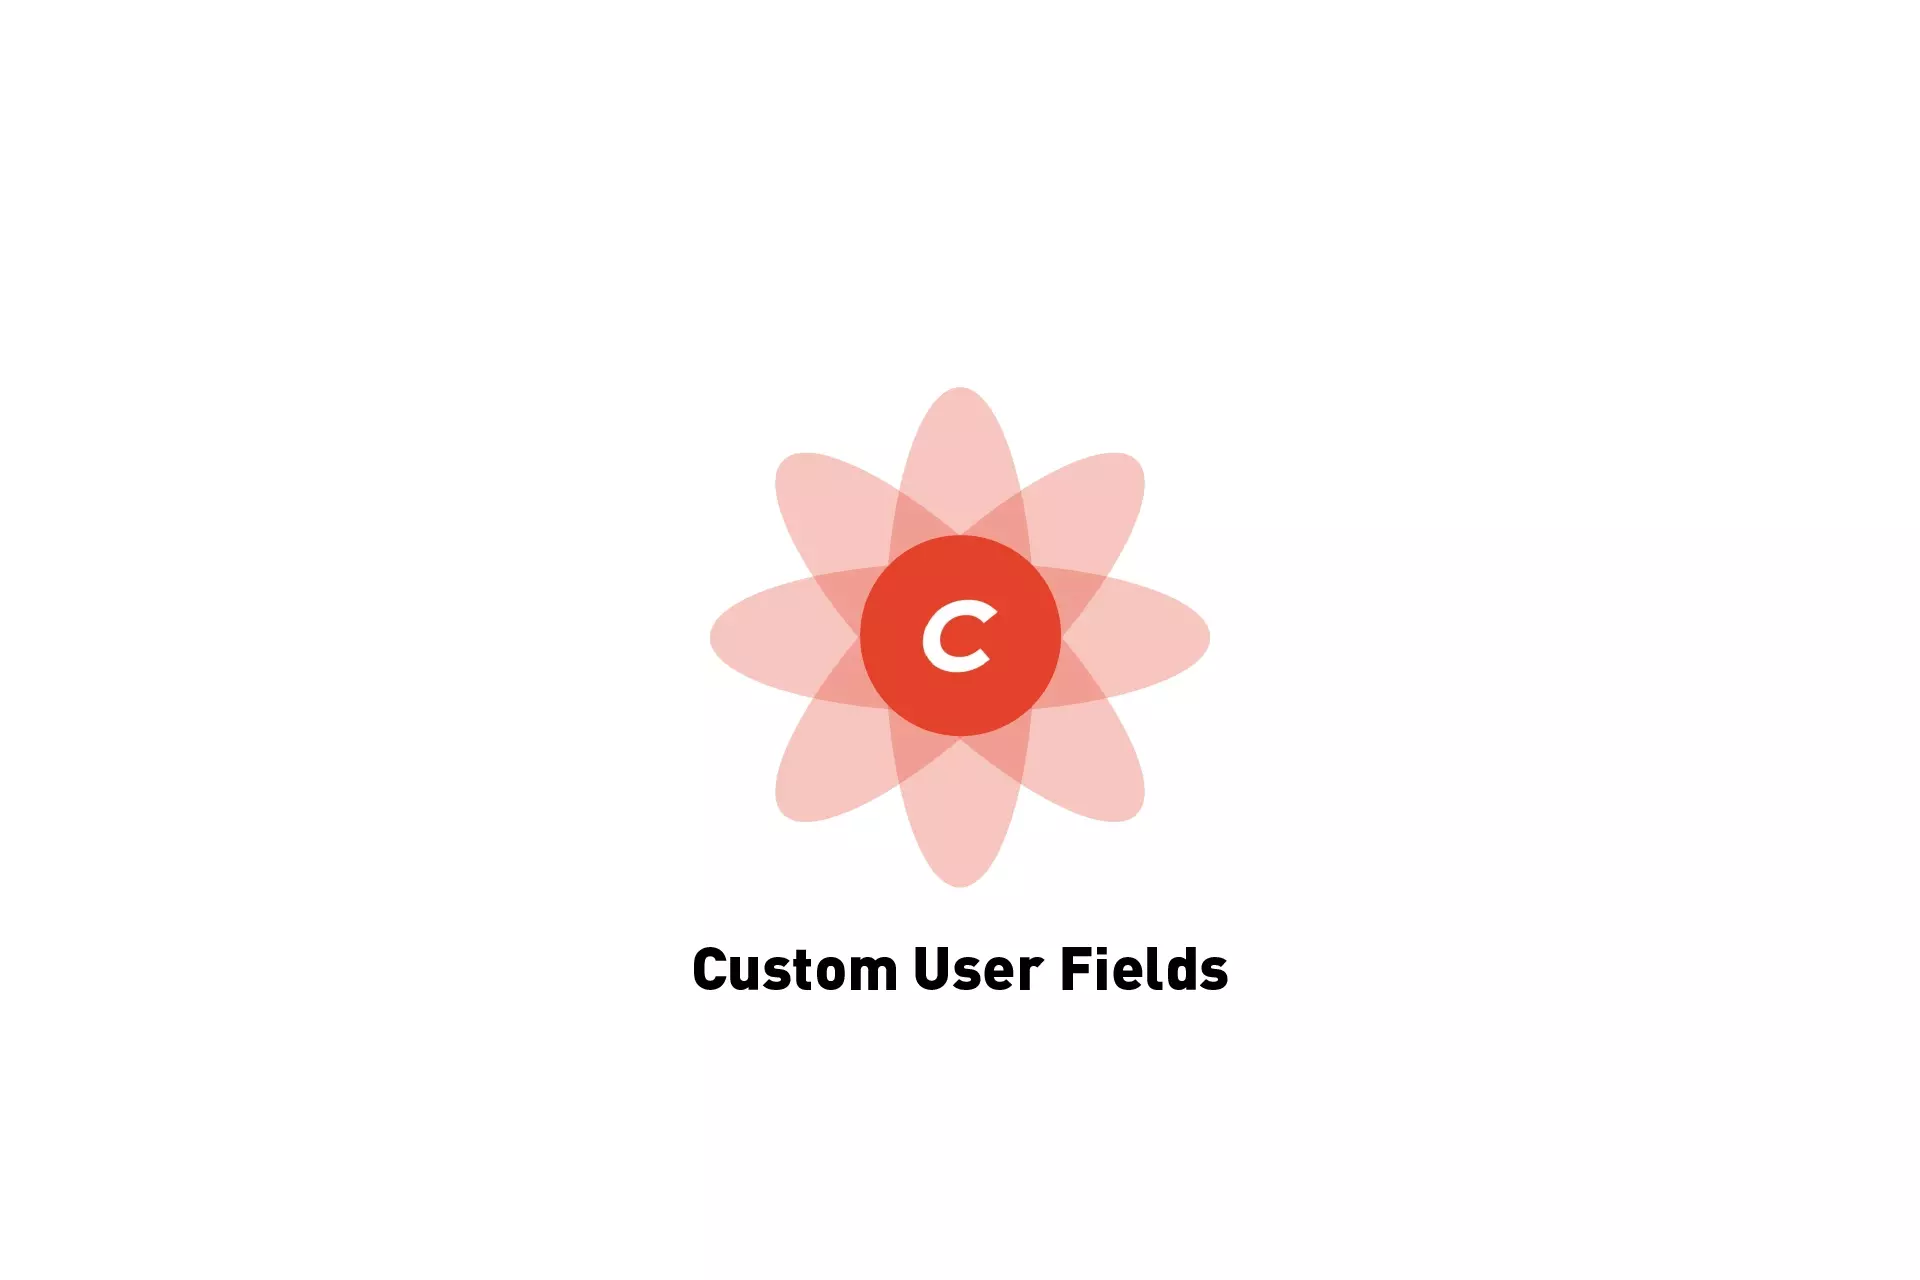 A flower that represents Craft CMS with the text "Custom User Fields" beneath it.